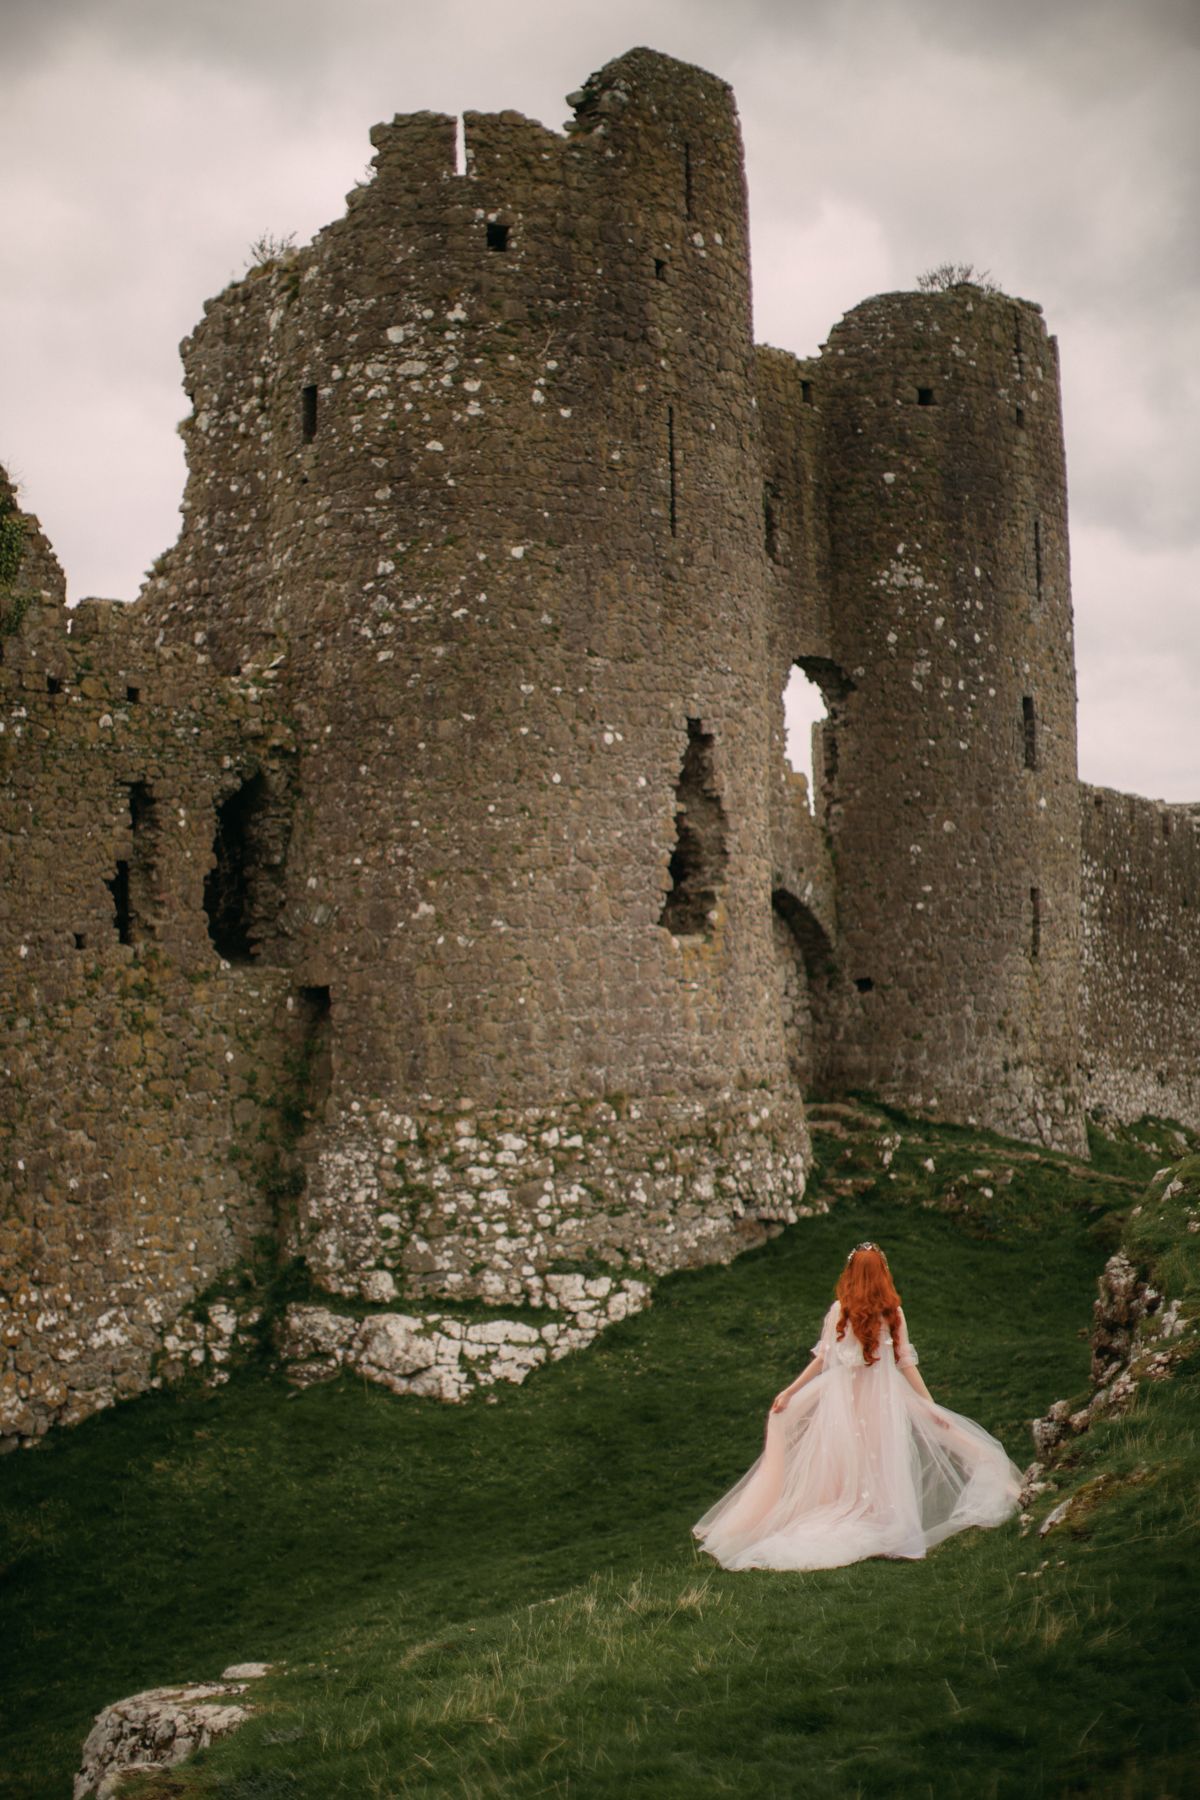 Shooting a Fictional Romance Cover at an Irish Castle Clothes Horse